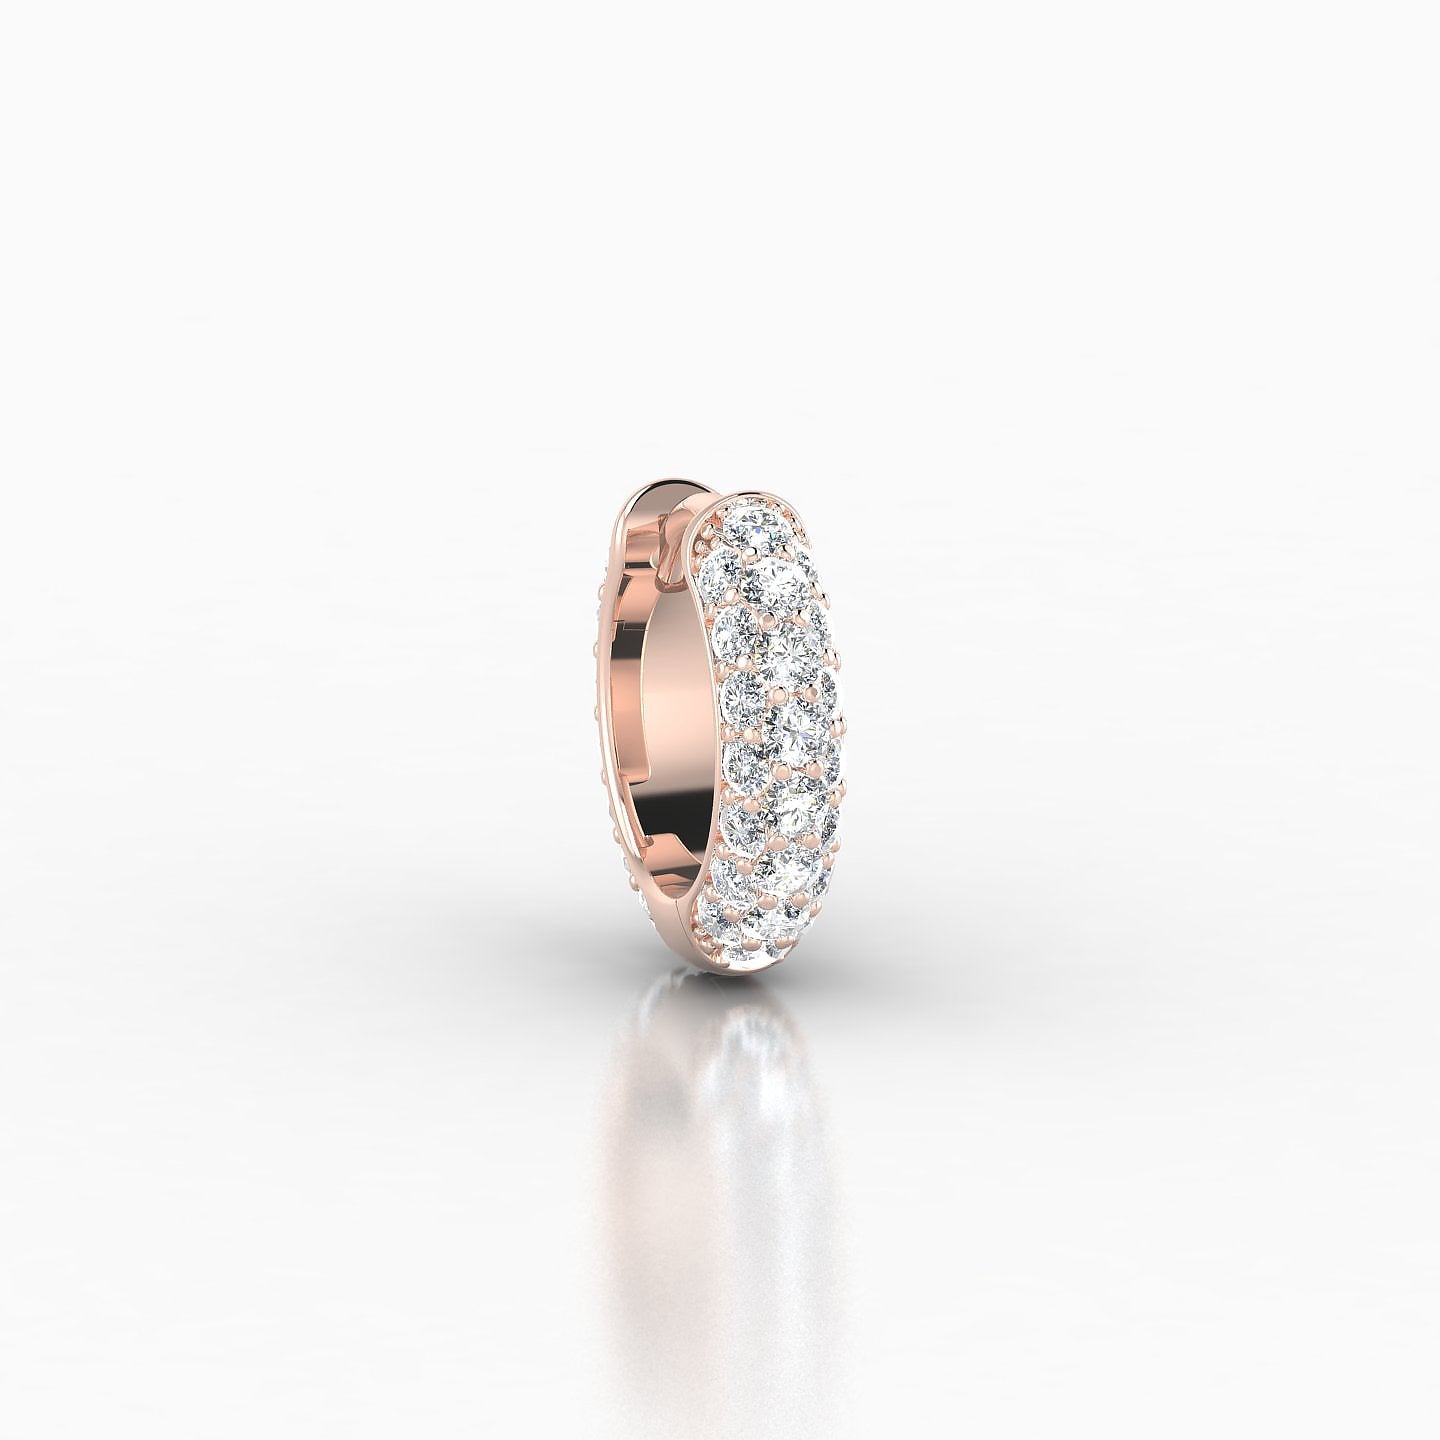 Theia | 18k Rose Gold 6.5 mm Pave Diamond Nose Ring Piercing